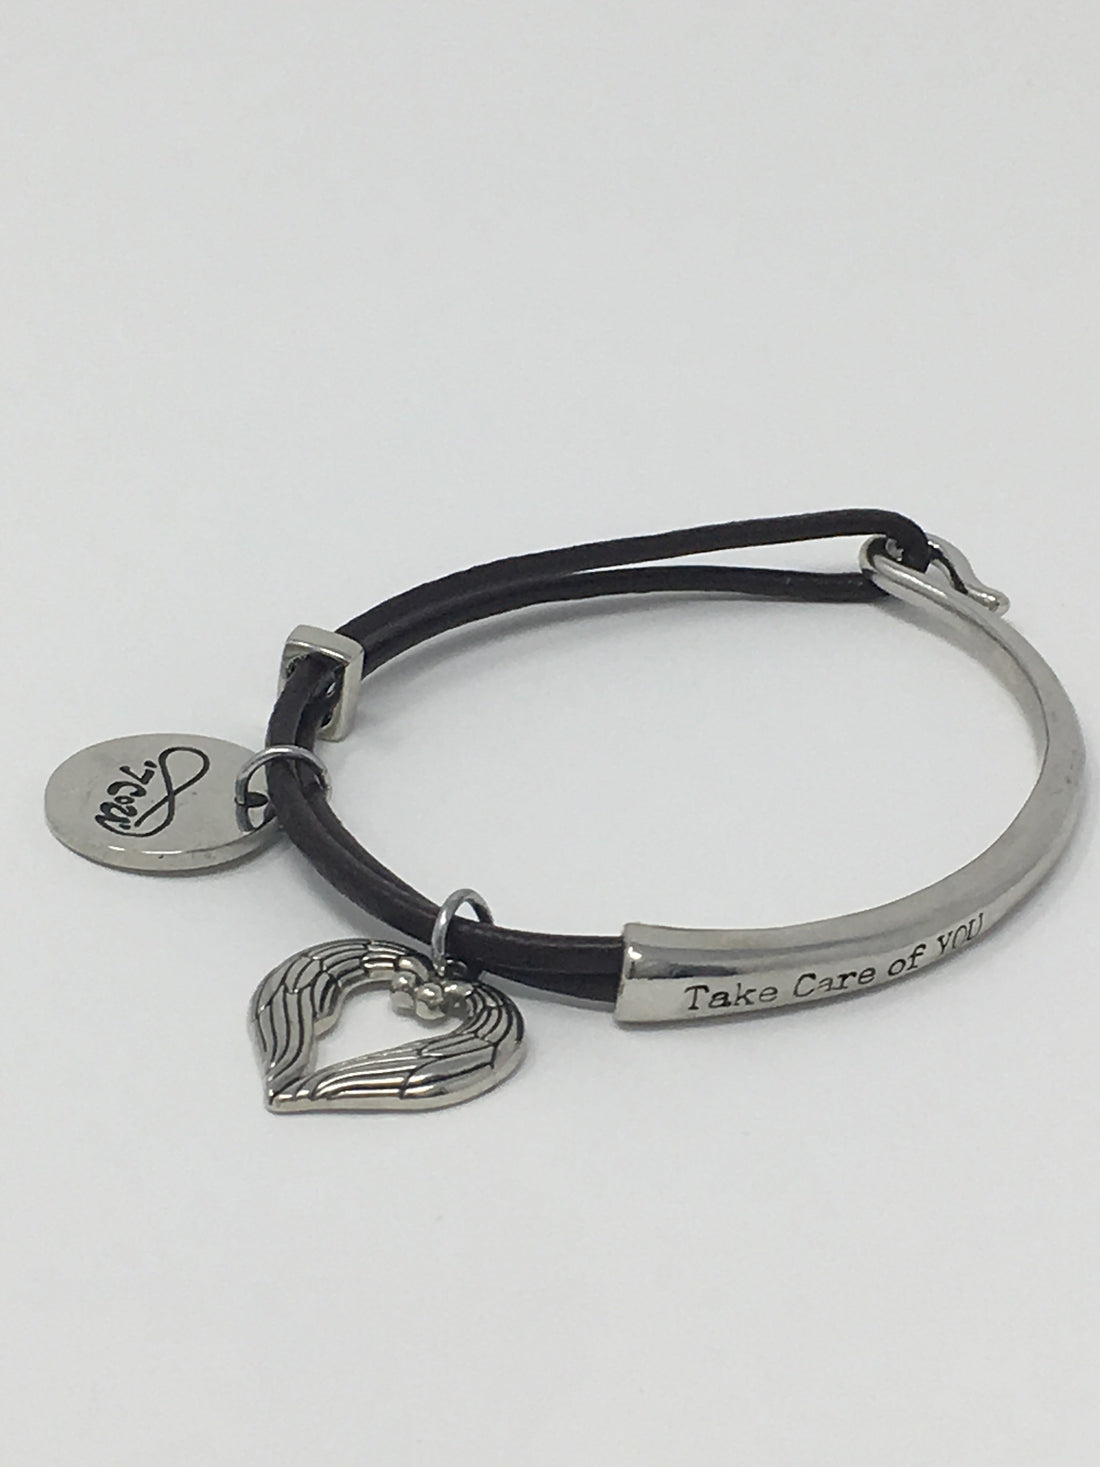 TCoU Winged Heart Bracelet, Represents Special Protection!!